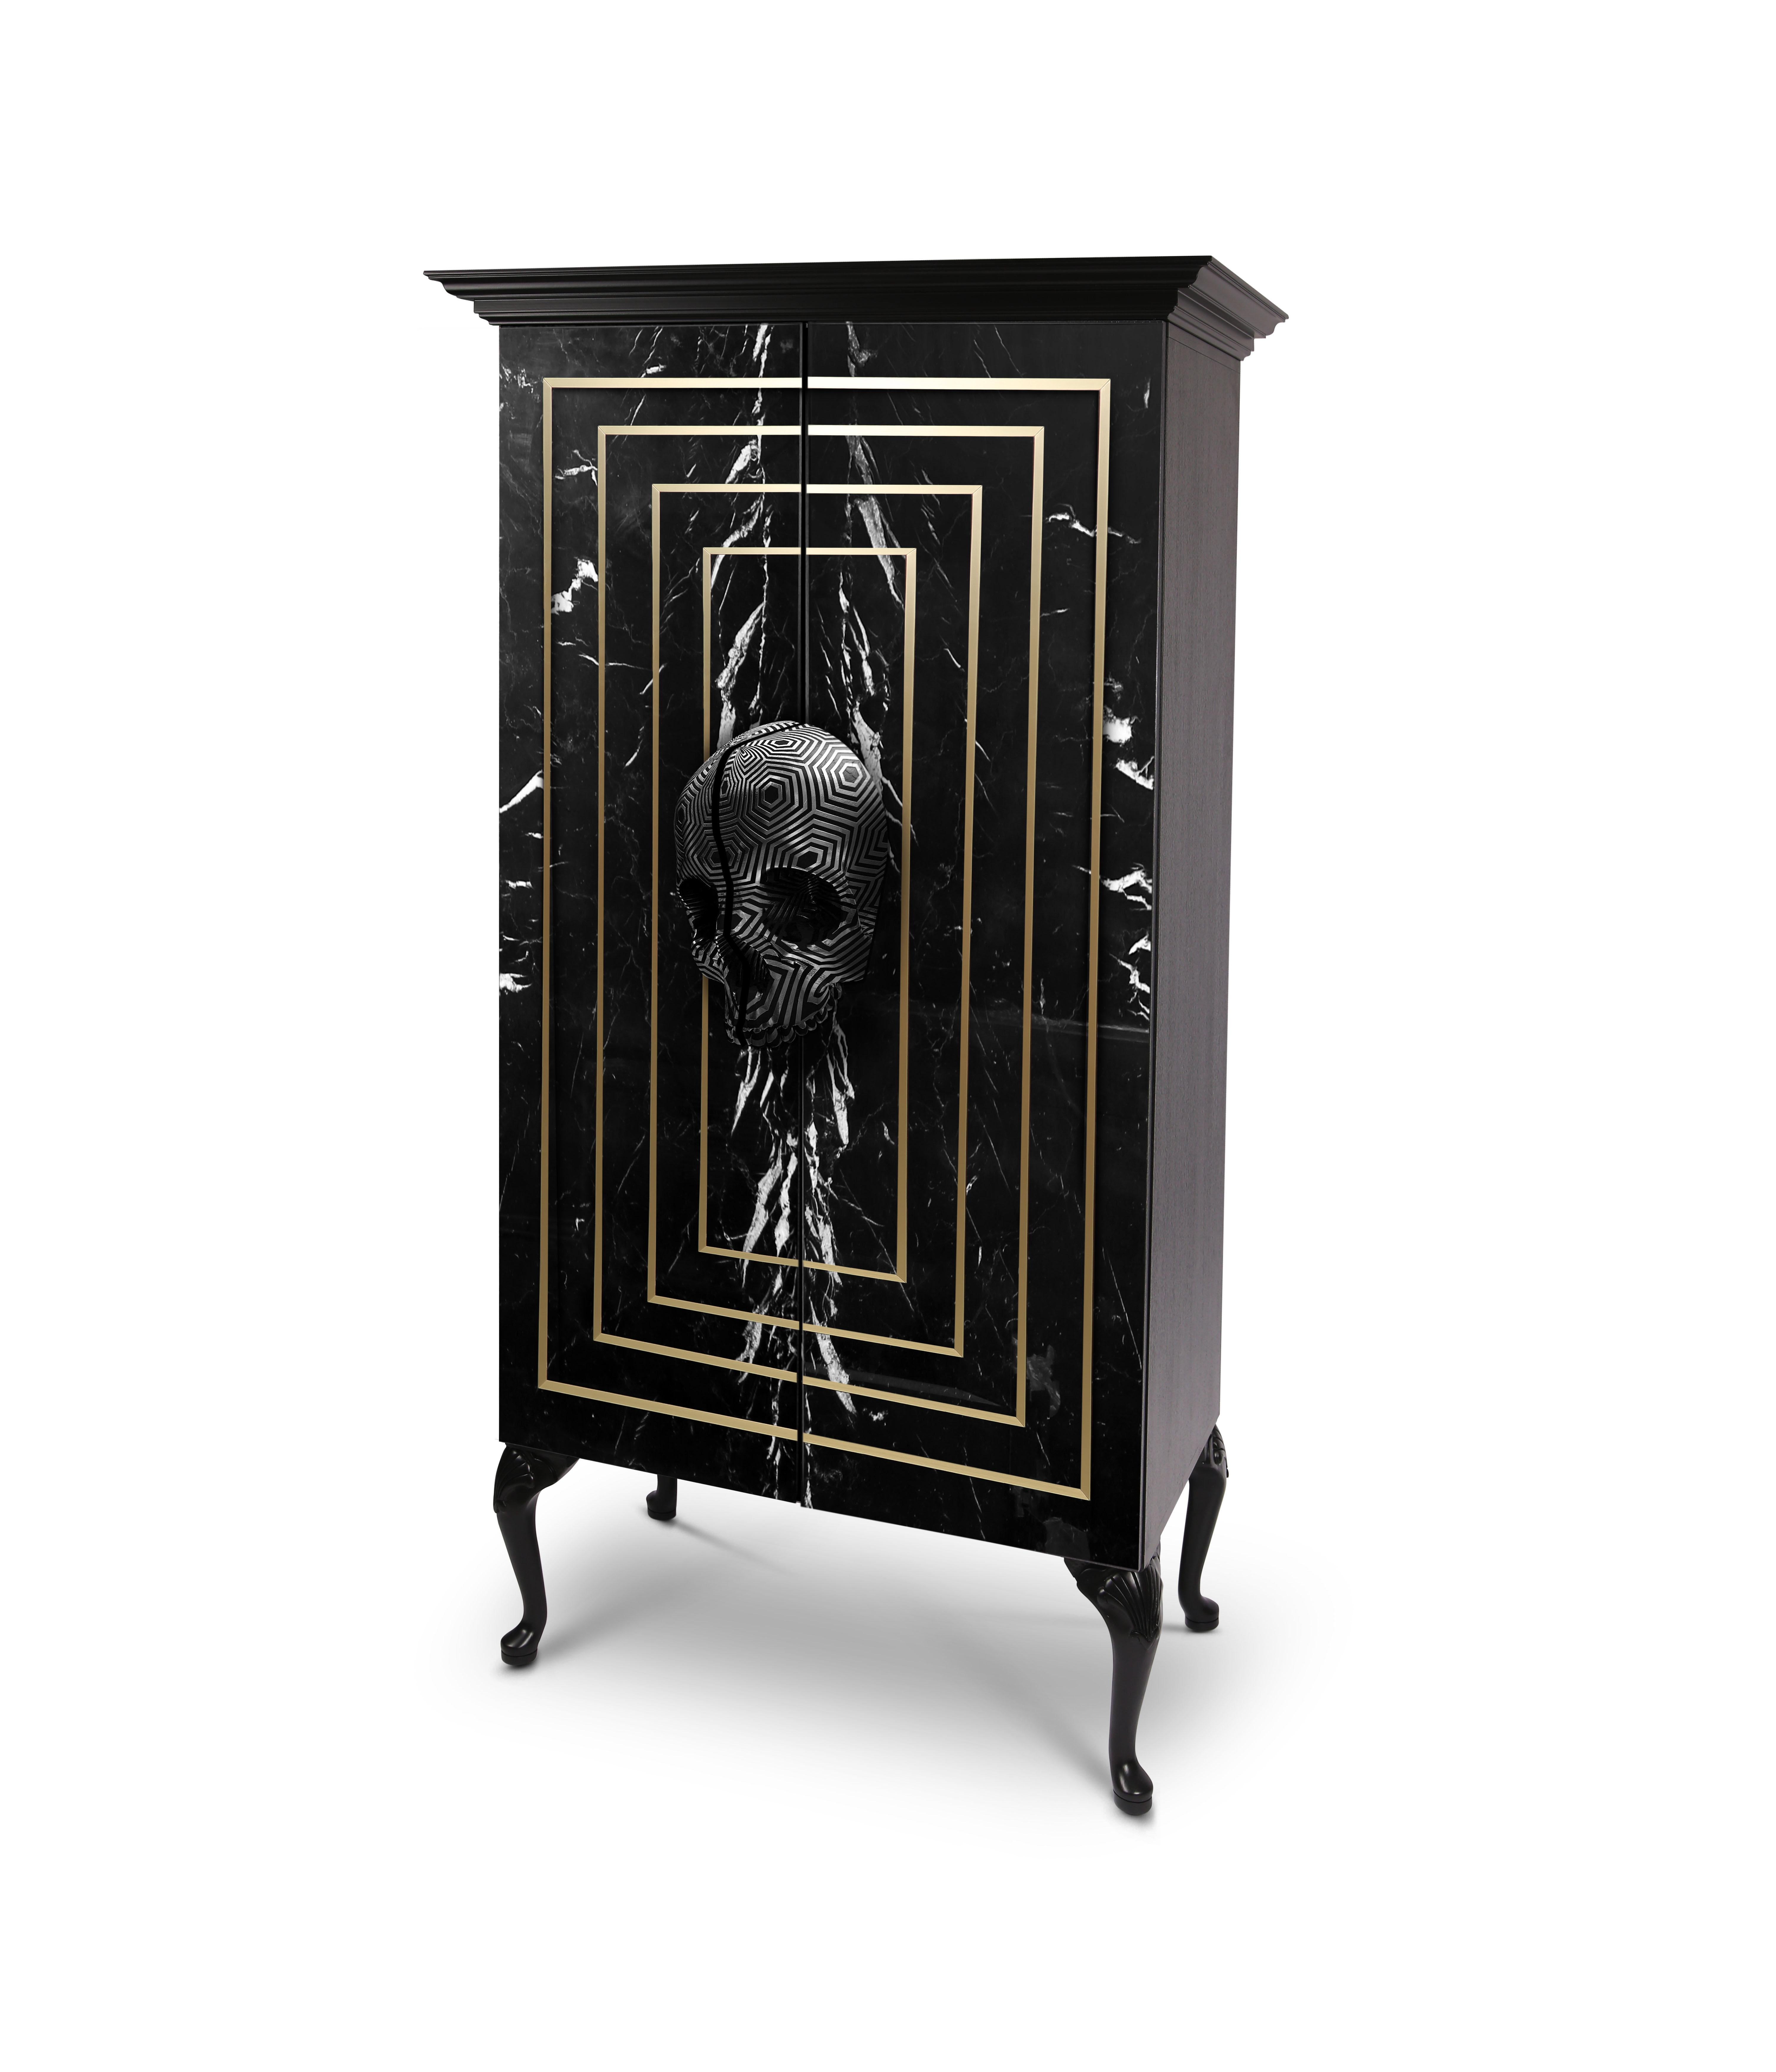 The skull 2 Door Armoire is versatile enough to accommodate just about anything you choose! Insert the adjustable shelf or as well. Featuring two doors concealing all your items, use hanging rod to store clothes, inside, you will find plenty of room